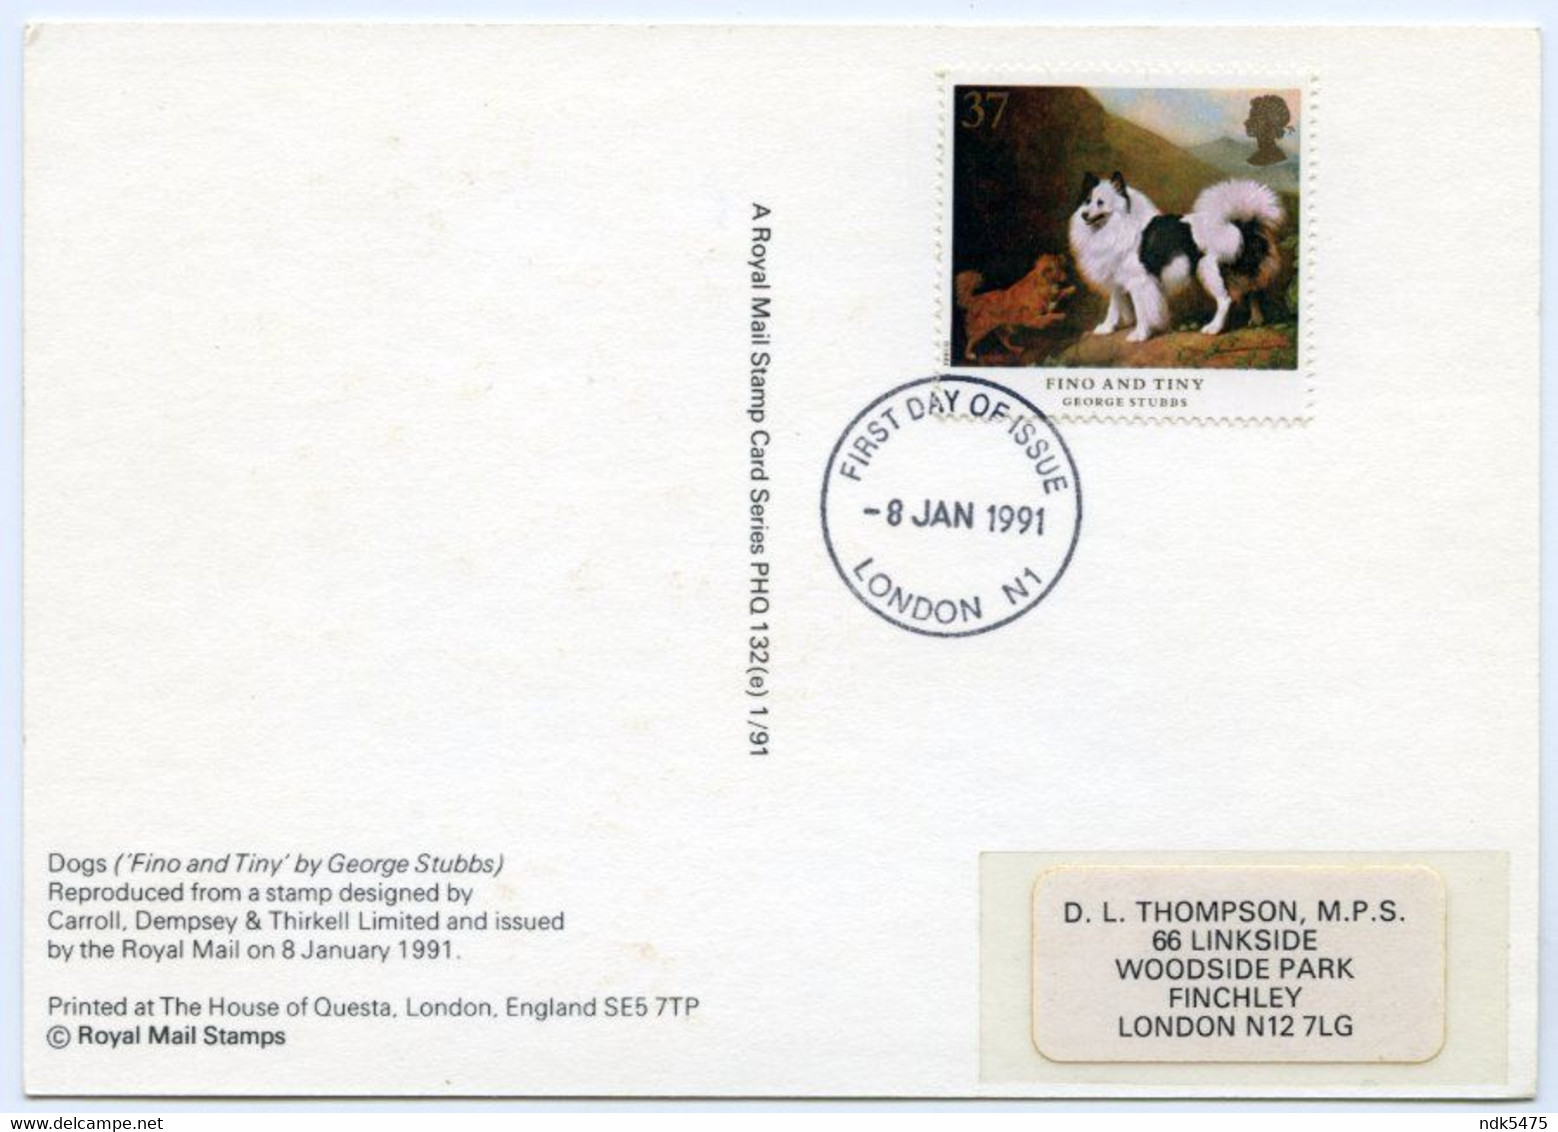 PHQ : GEORGE STUBBS - DOGS, FINO AND TINY, 1991 : FIRST DAY OF ISSUE, LONDON N1, FINCHLEY (10 X 15cms Approx.) - PHQ Karten